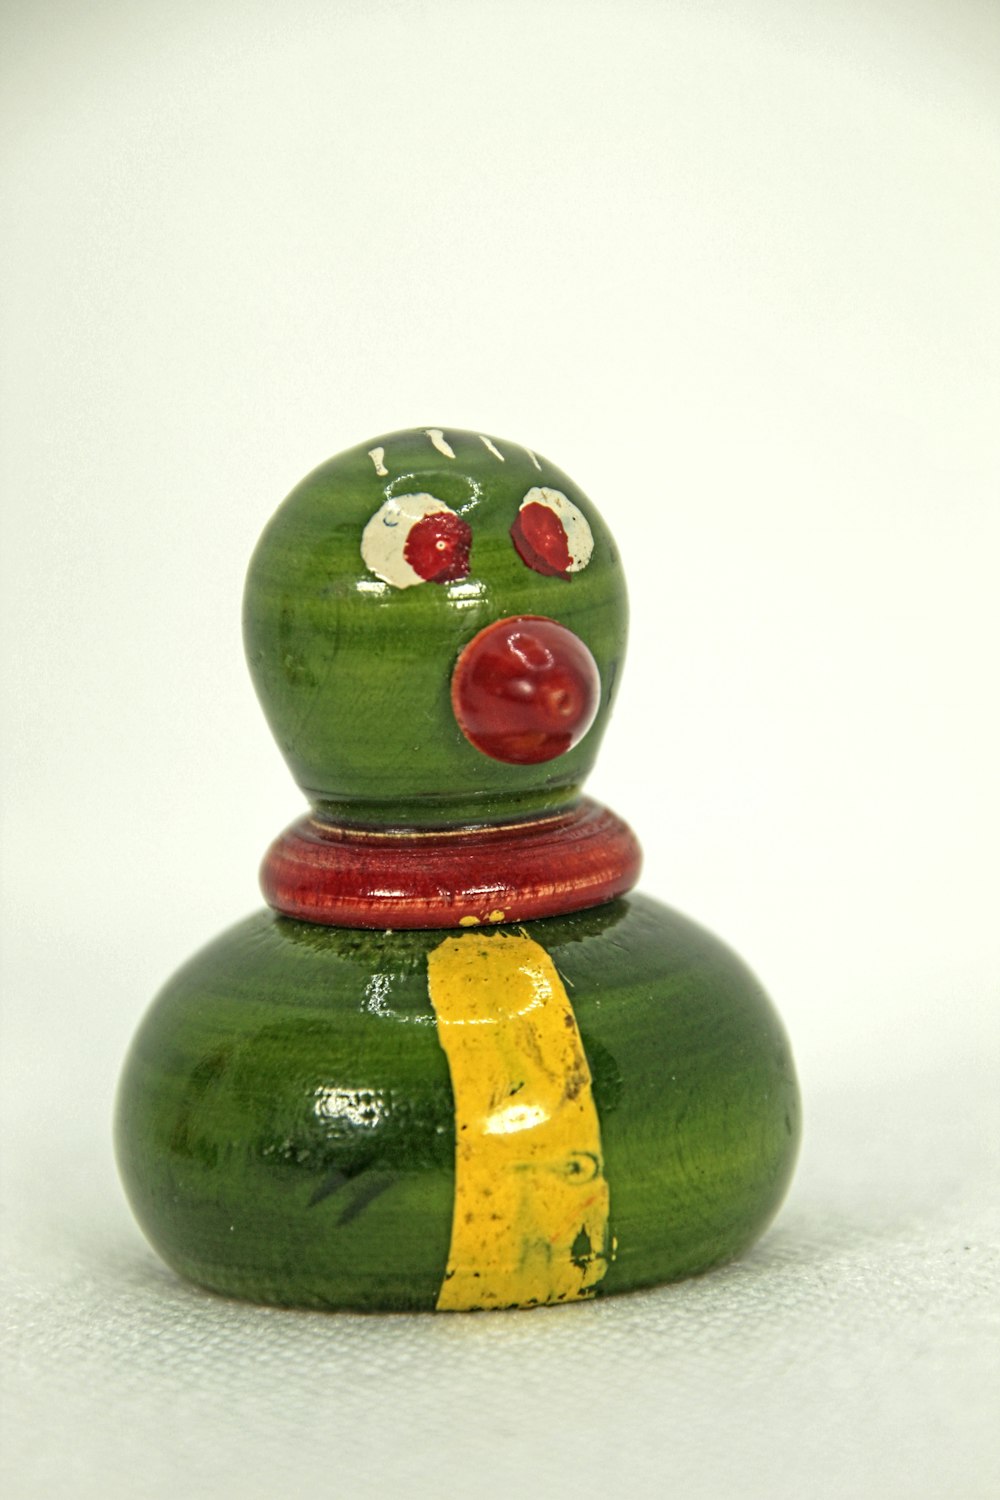 a green toy with a red nose and nose ring